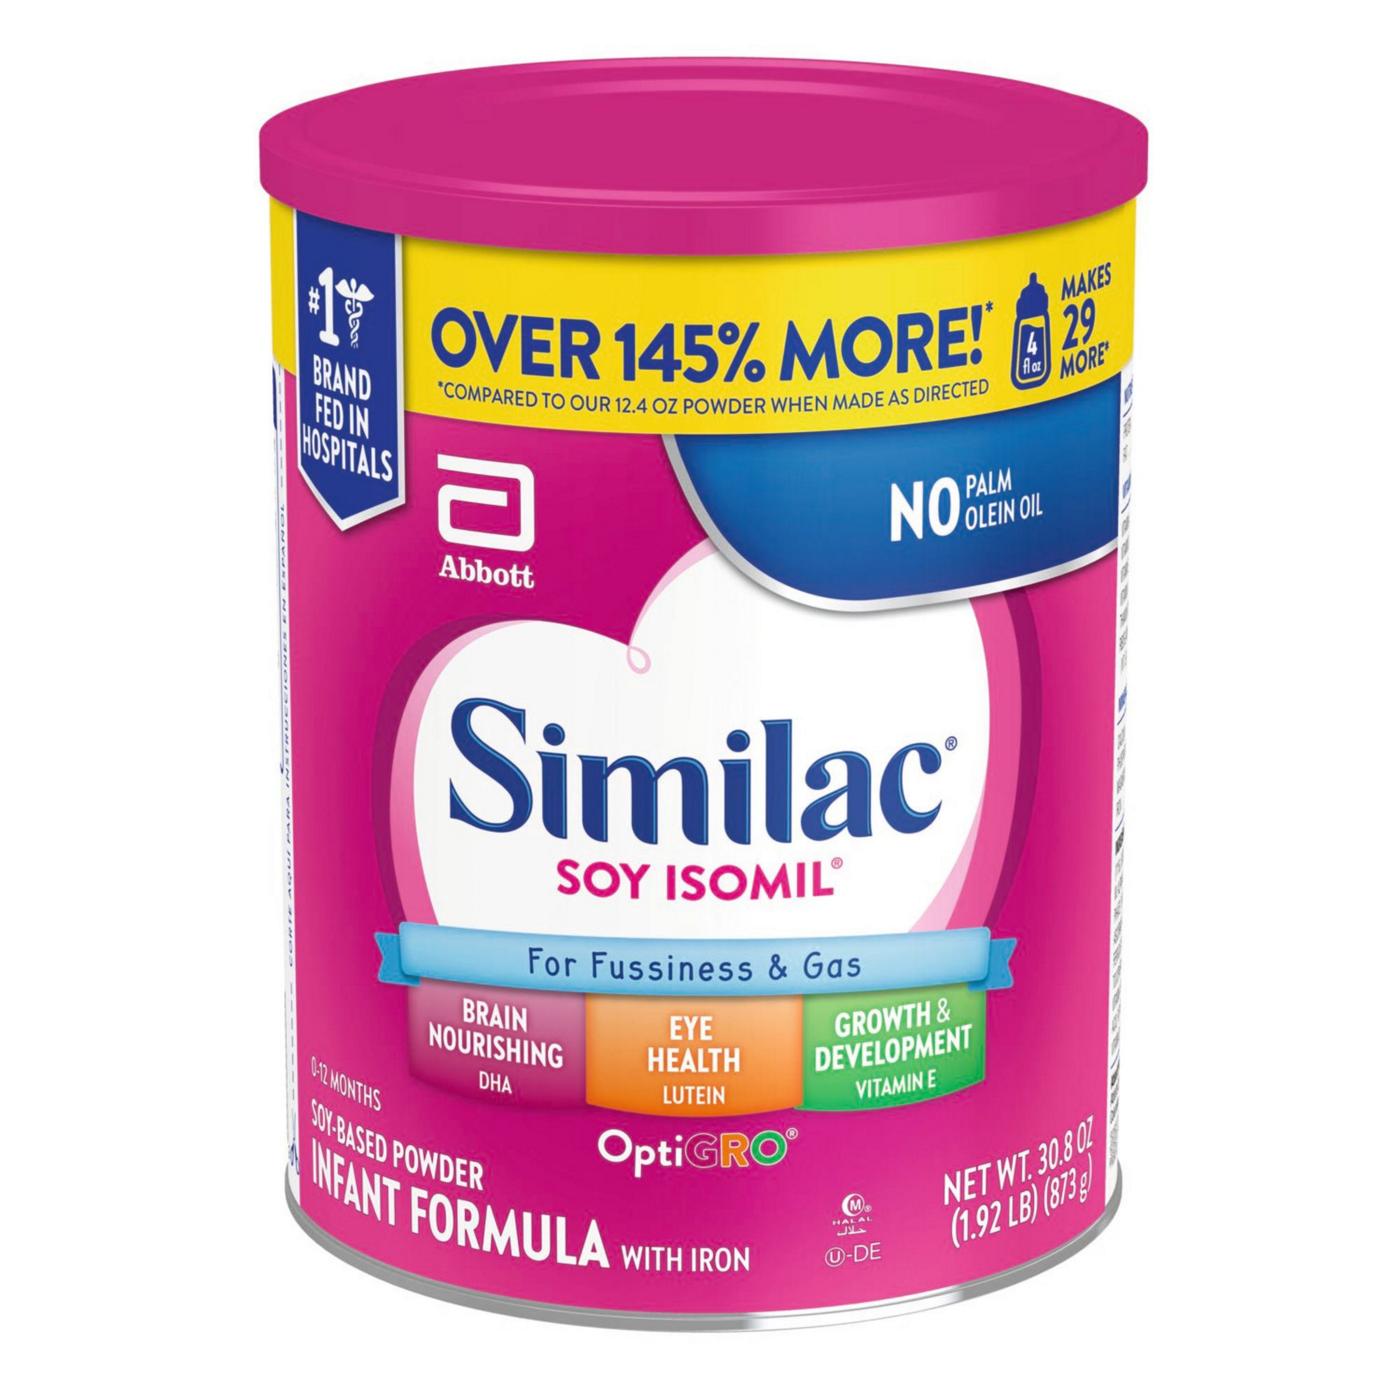 Similac Soy Isomil For Fussiness and Gas Infant Formula with Iron Powder; image 7 of 9